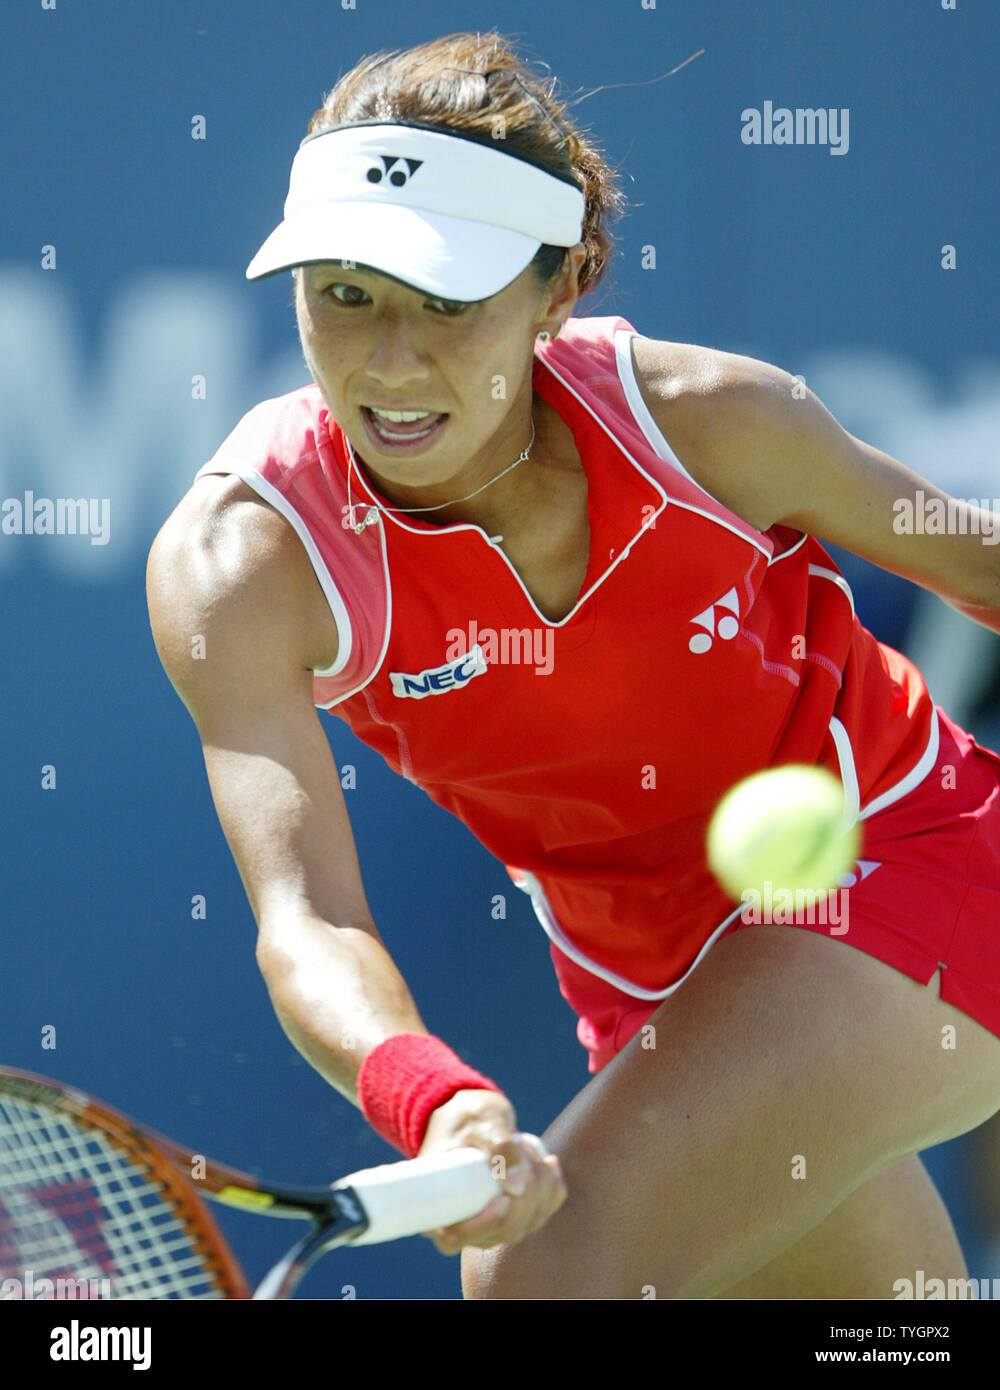 Shinobu Asagoe (JPN) hits a forehand during her defeat of Eleni Daniilidou (GRE) in 3 sets during day 8 action at the US Open in Flushing, New York on September 6, 2004.    (UPI Photo/John Angelillo) Stock Photo